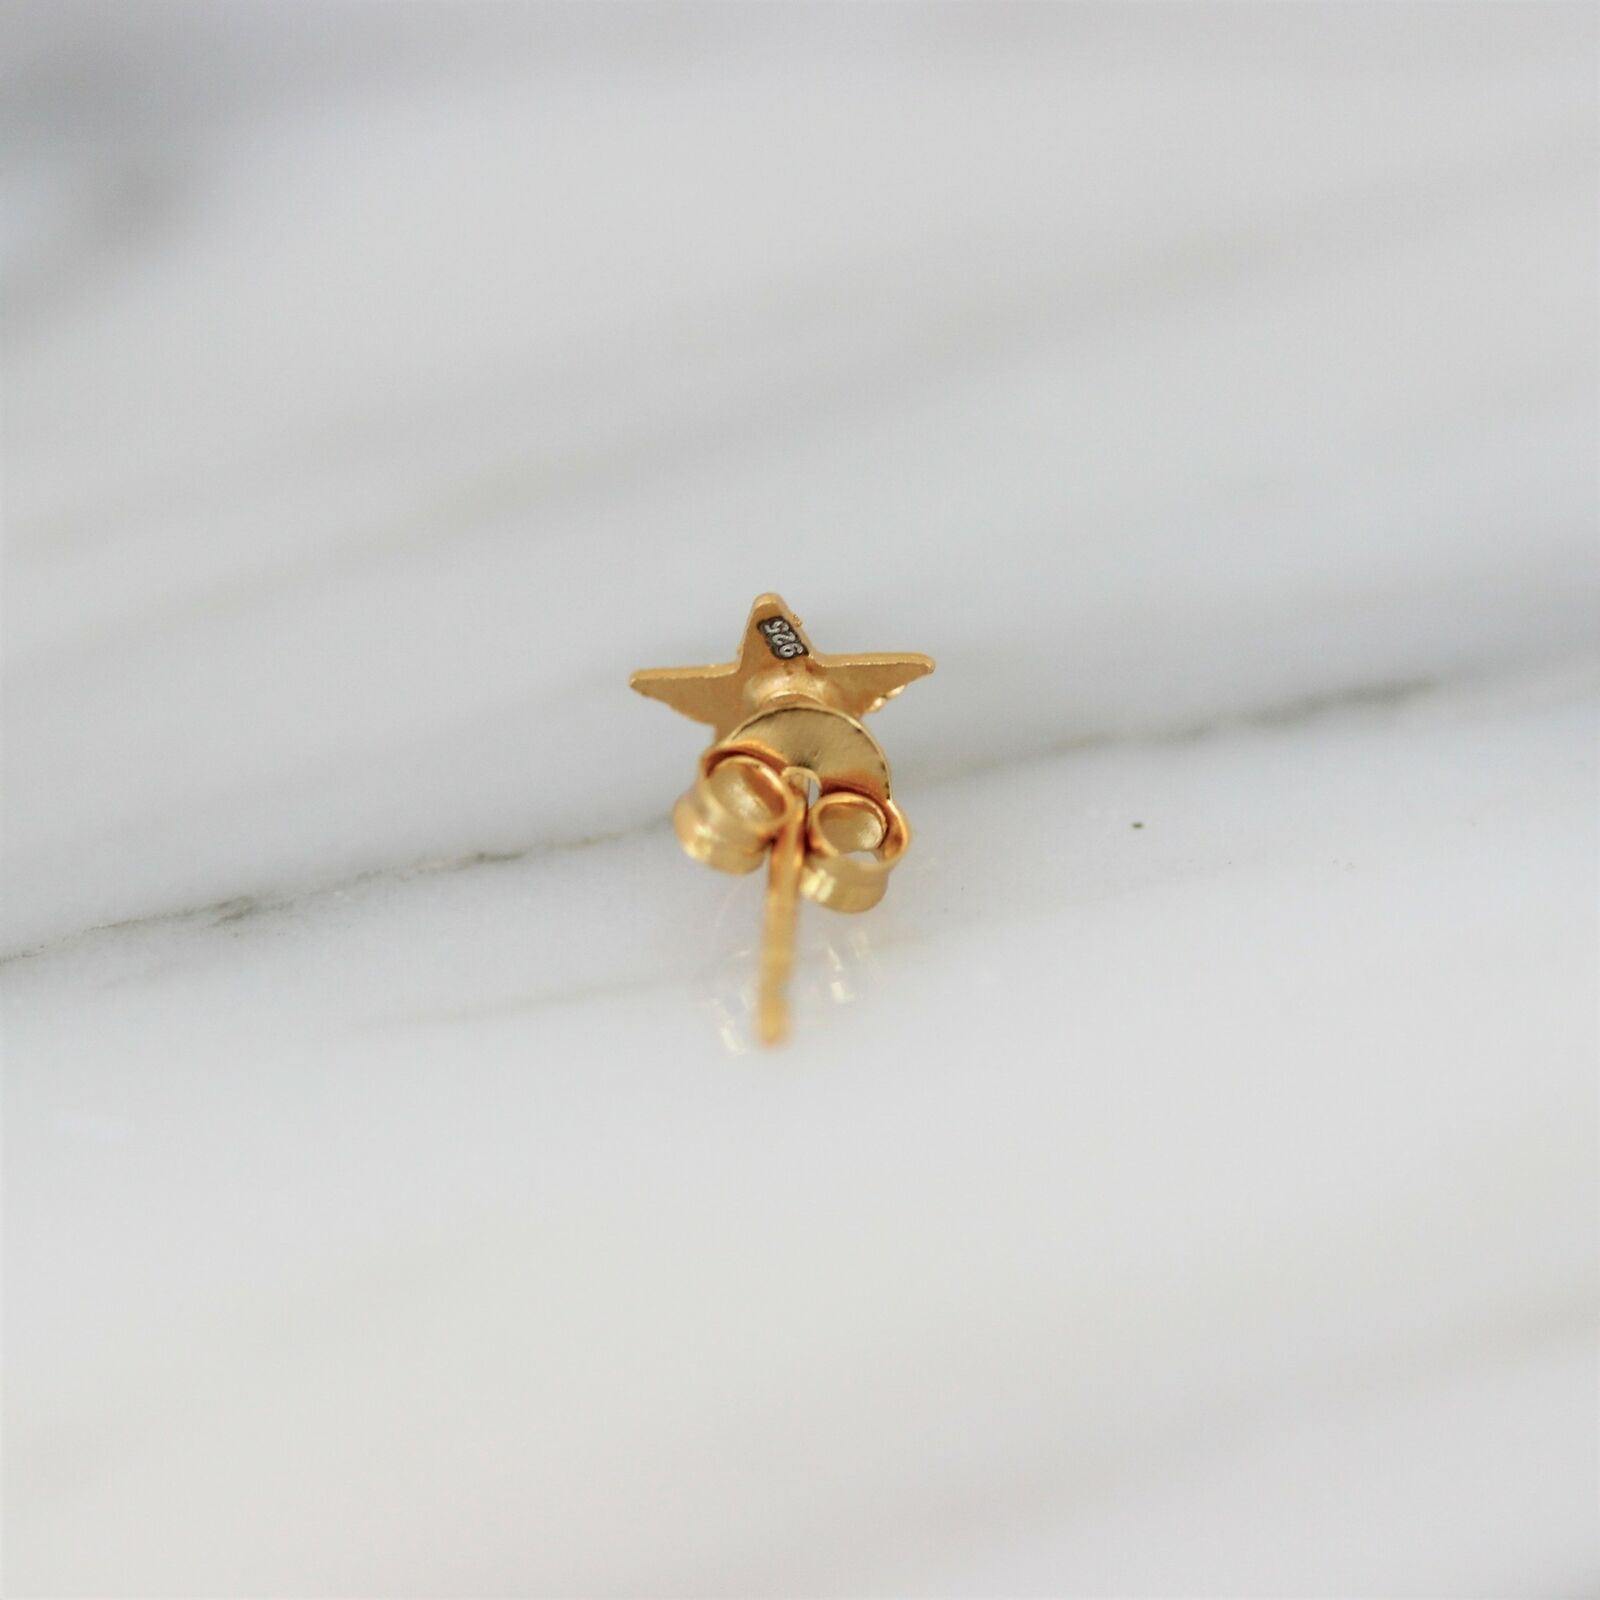 Sterling Silver Yellow Gold Plated Small 7mm Brushed Matt Star Stud Earrings - STERLING SILVER DESIGNS